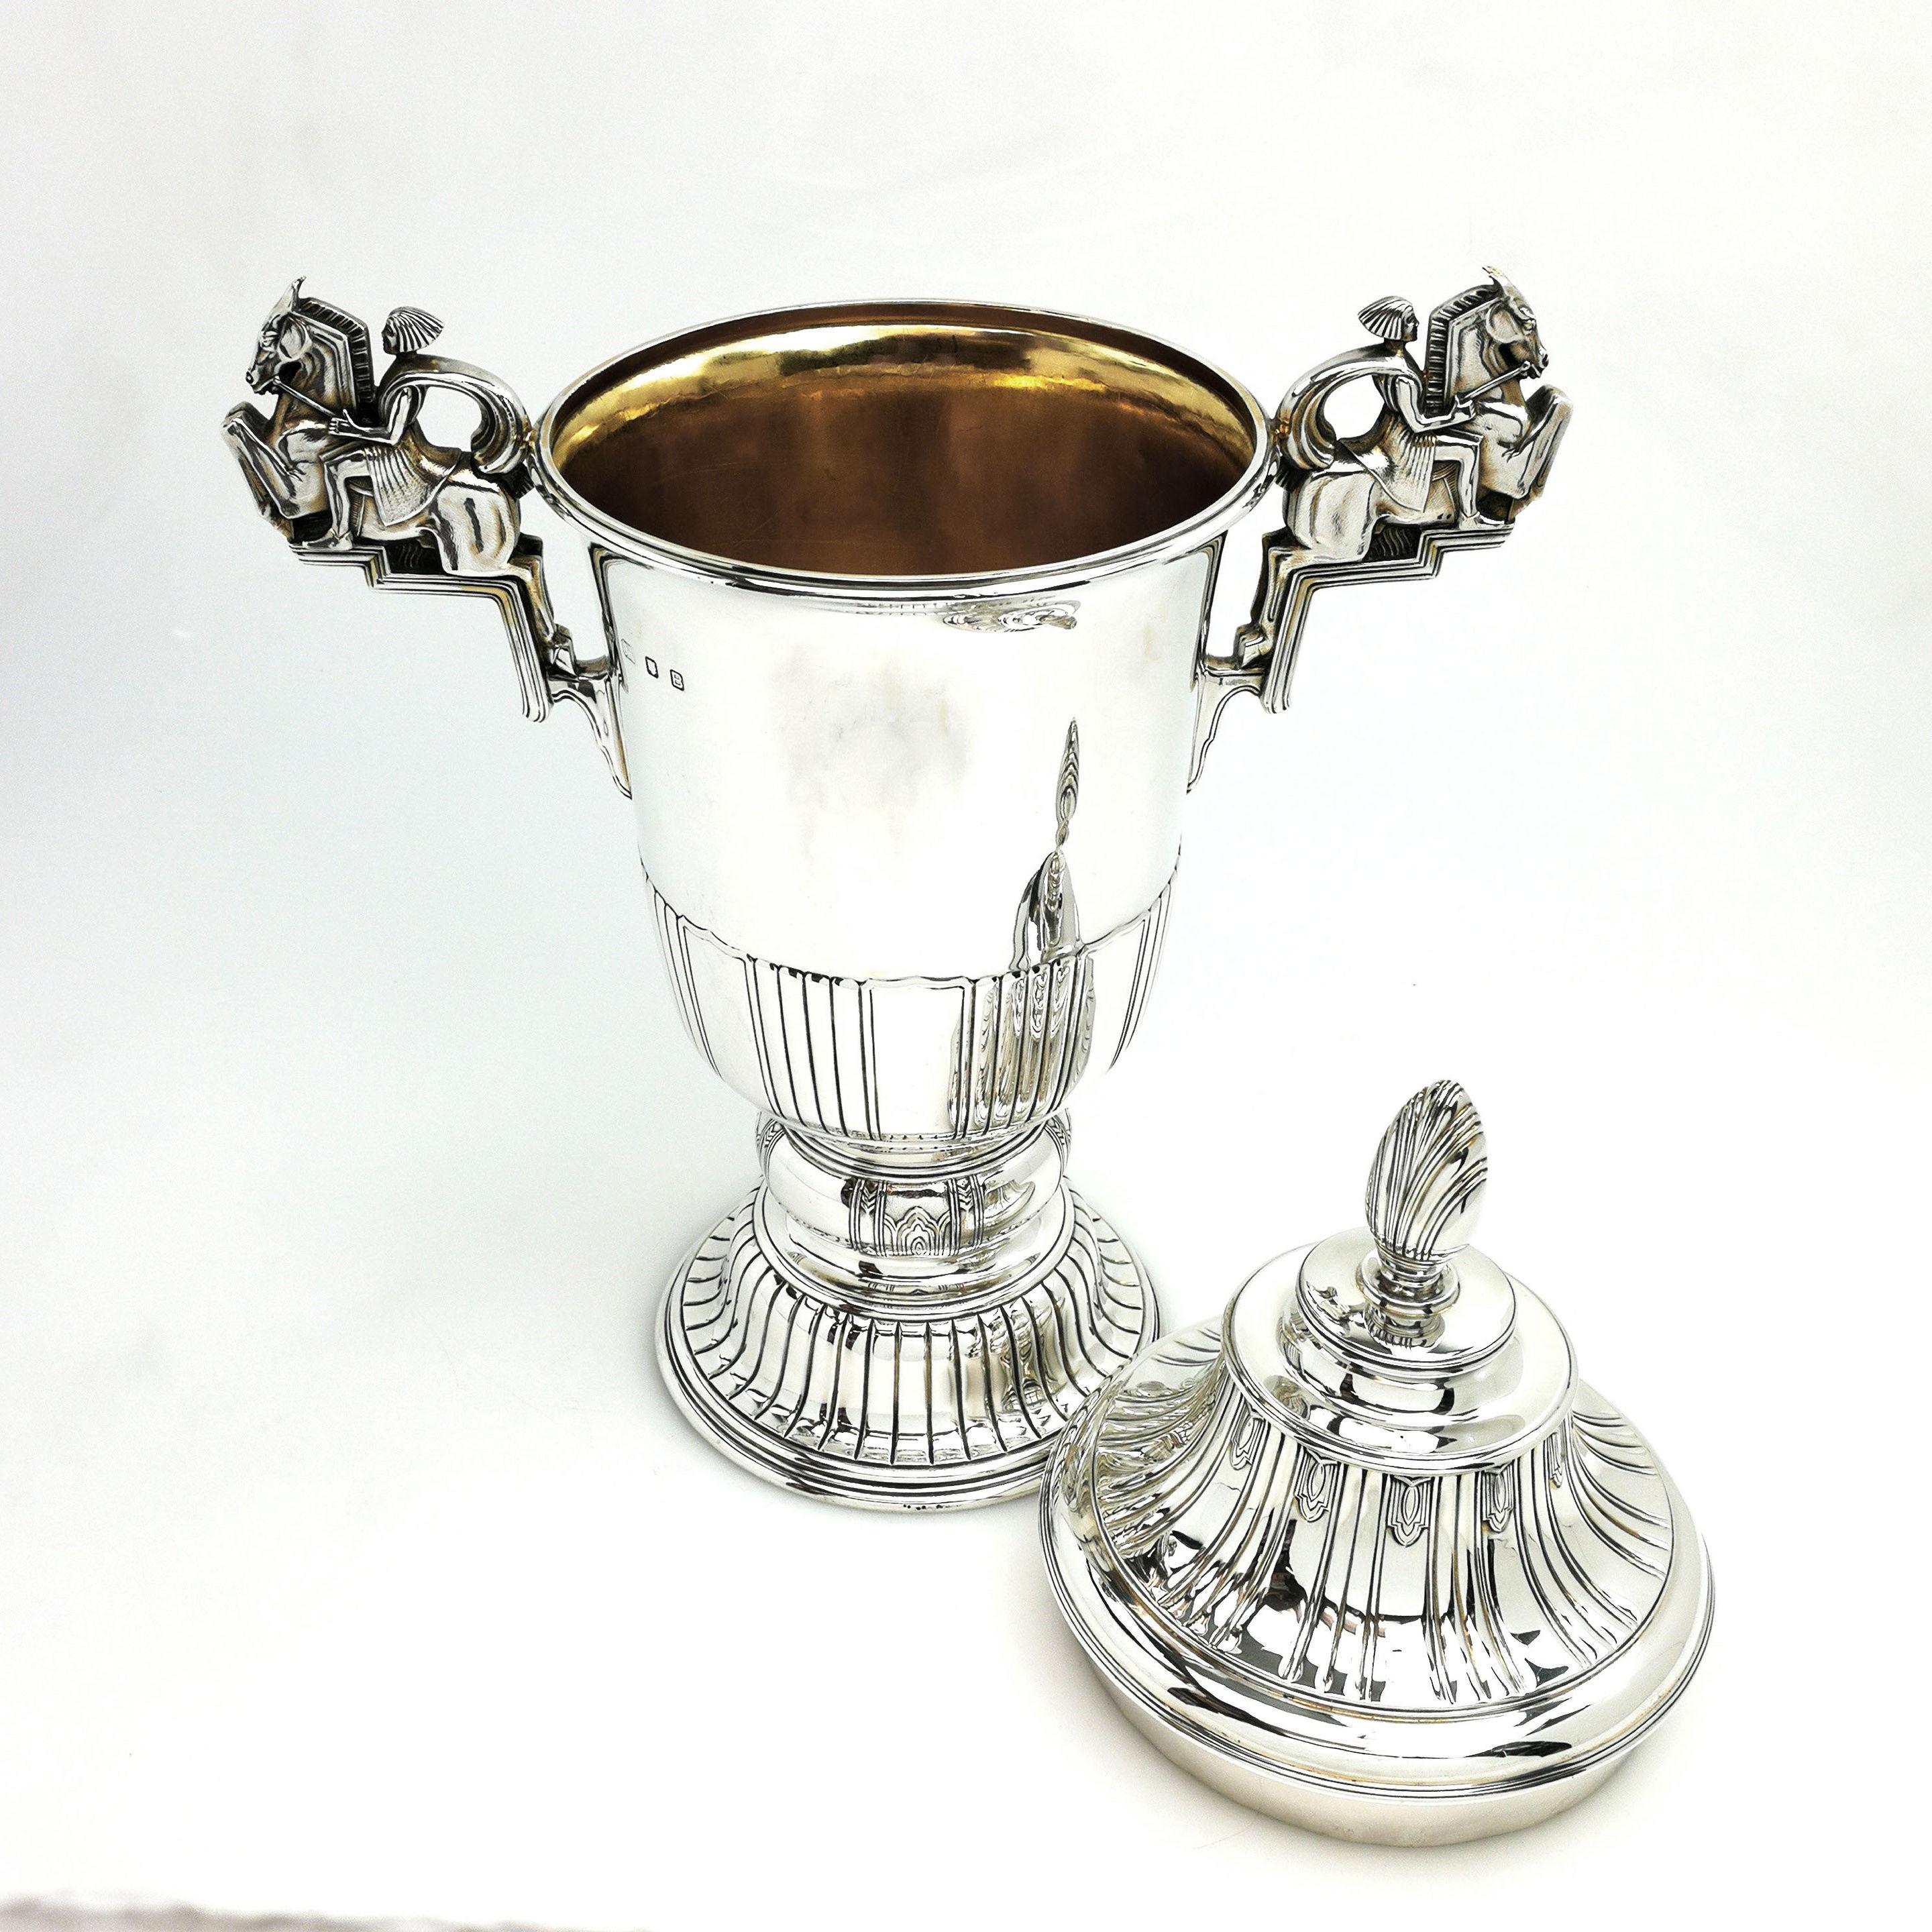 English Art Deco Large Sterling Silver Cup & Cover / Trophy 1937 Horse Equestrian